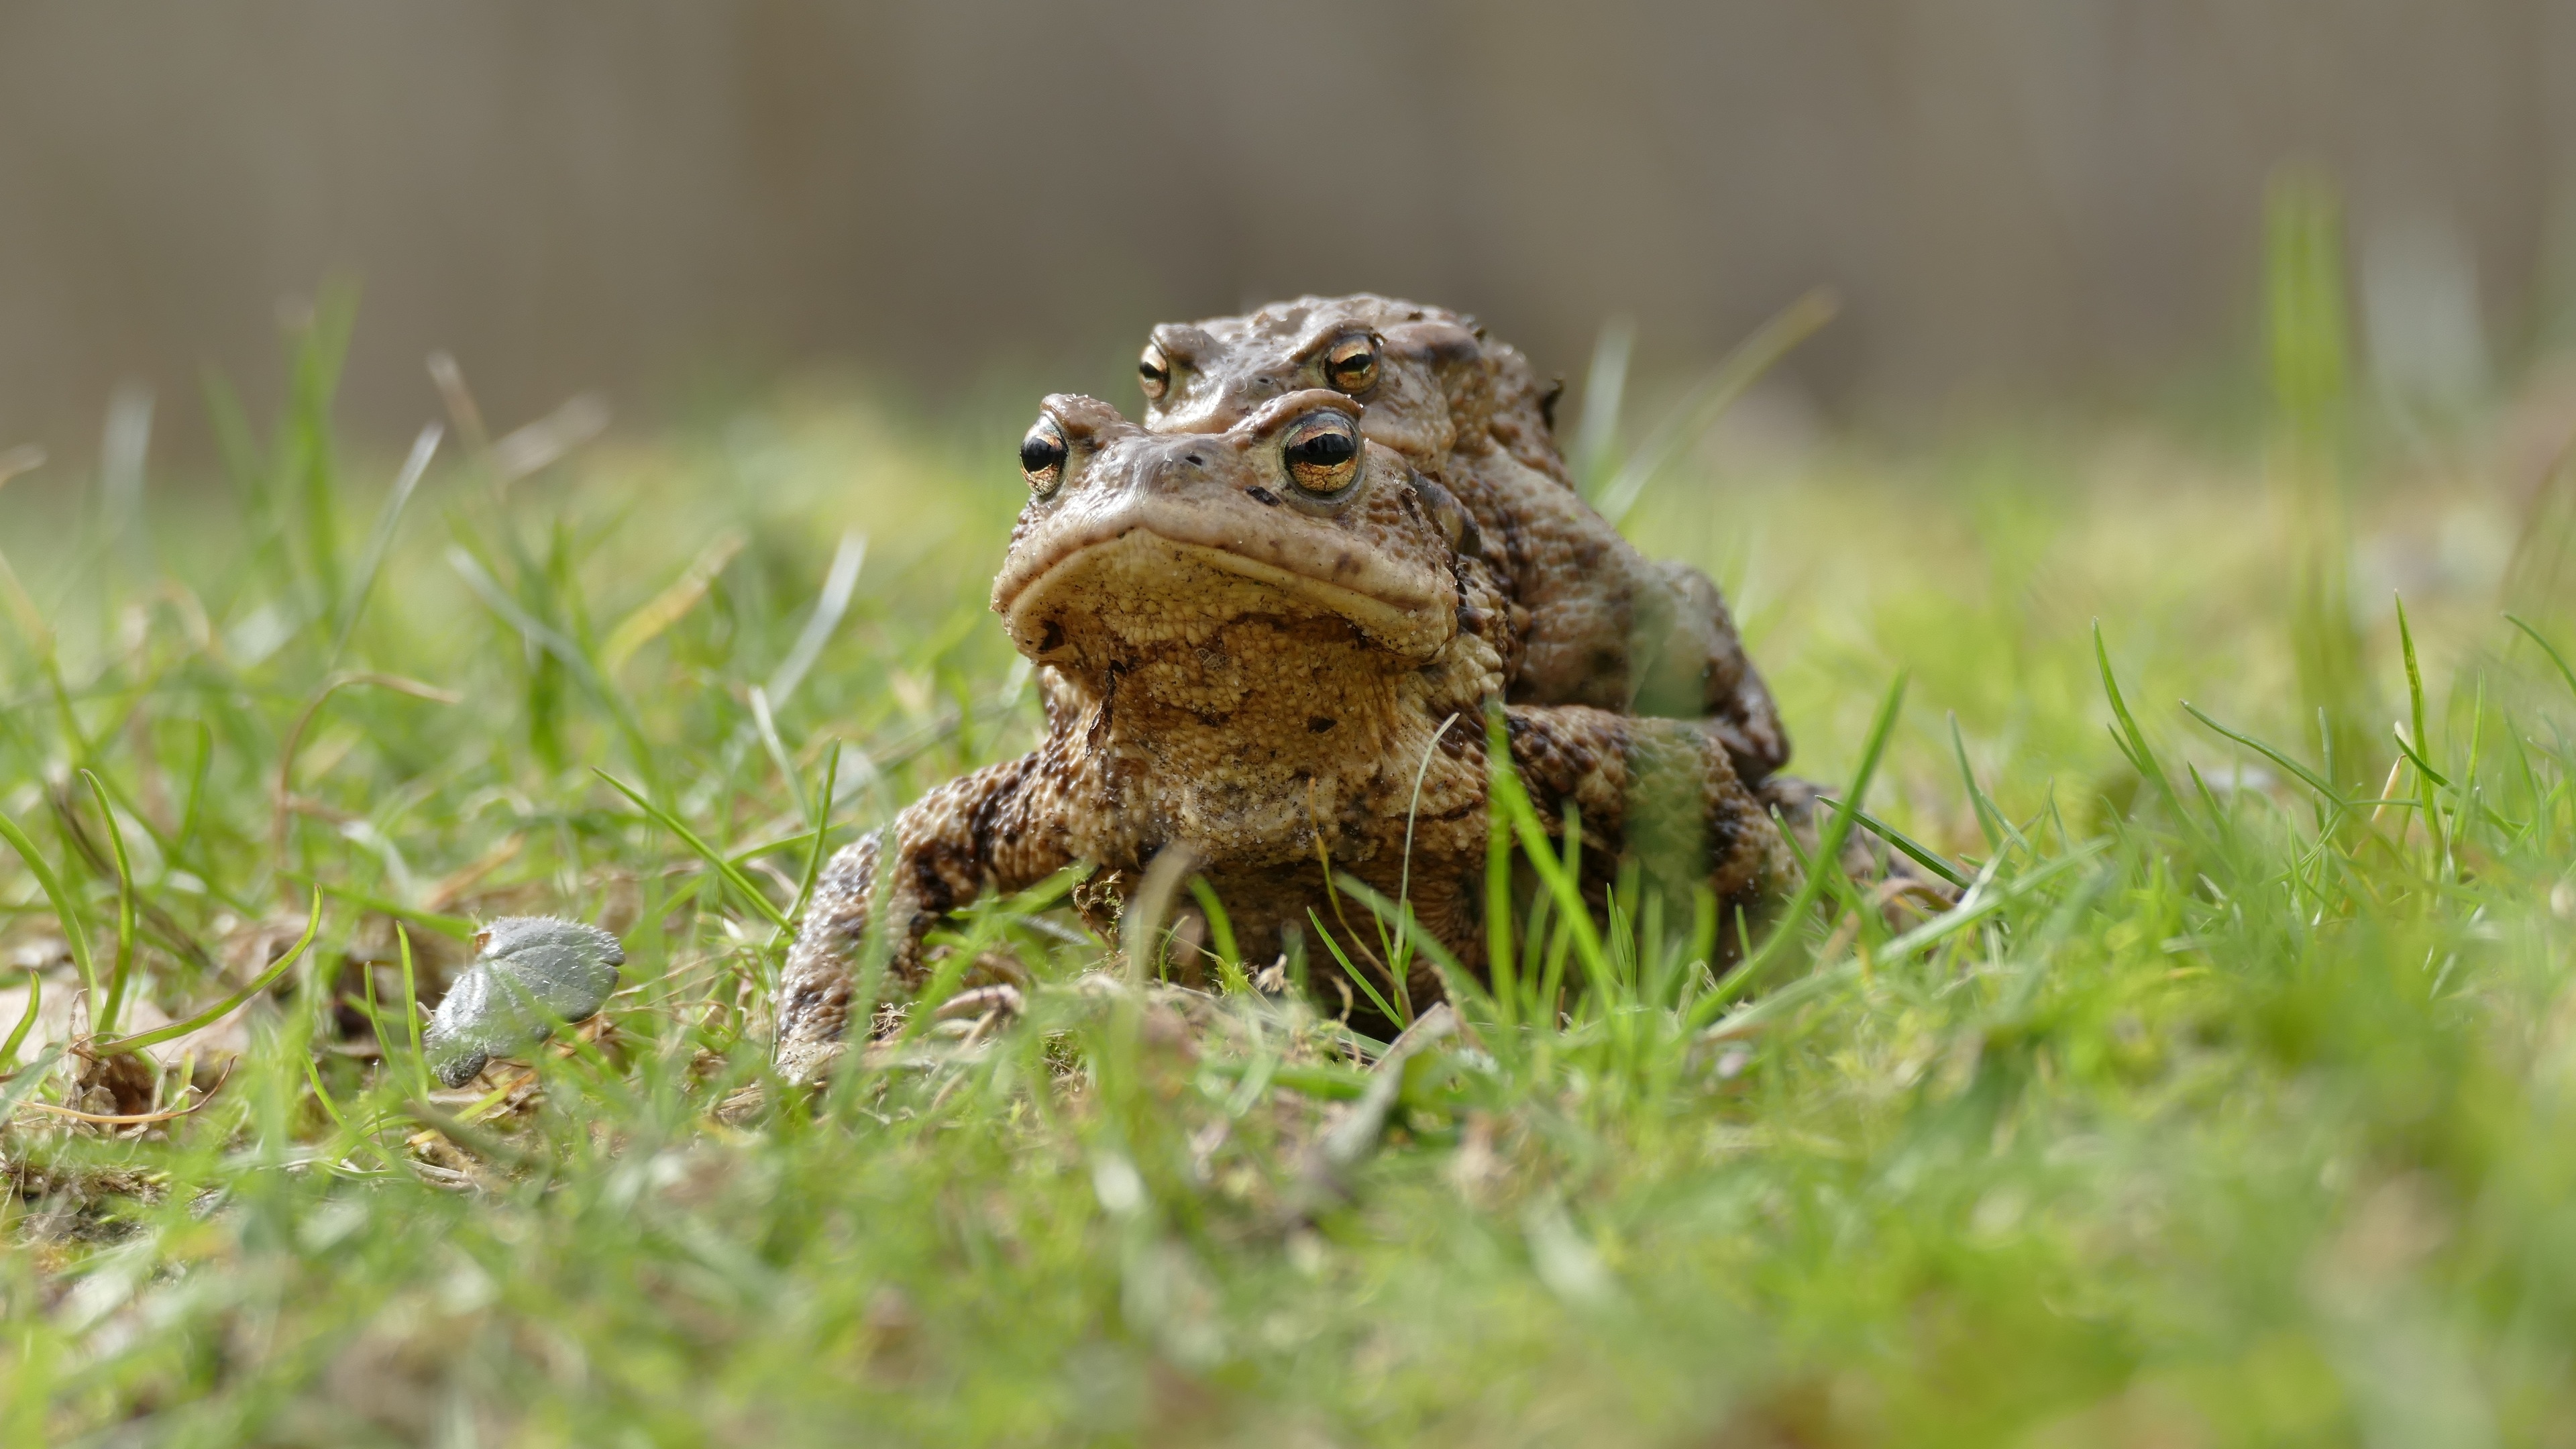 tilt shift photo of two brown frogs on grass grass